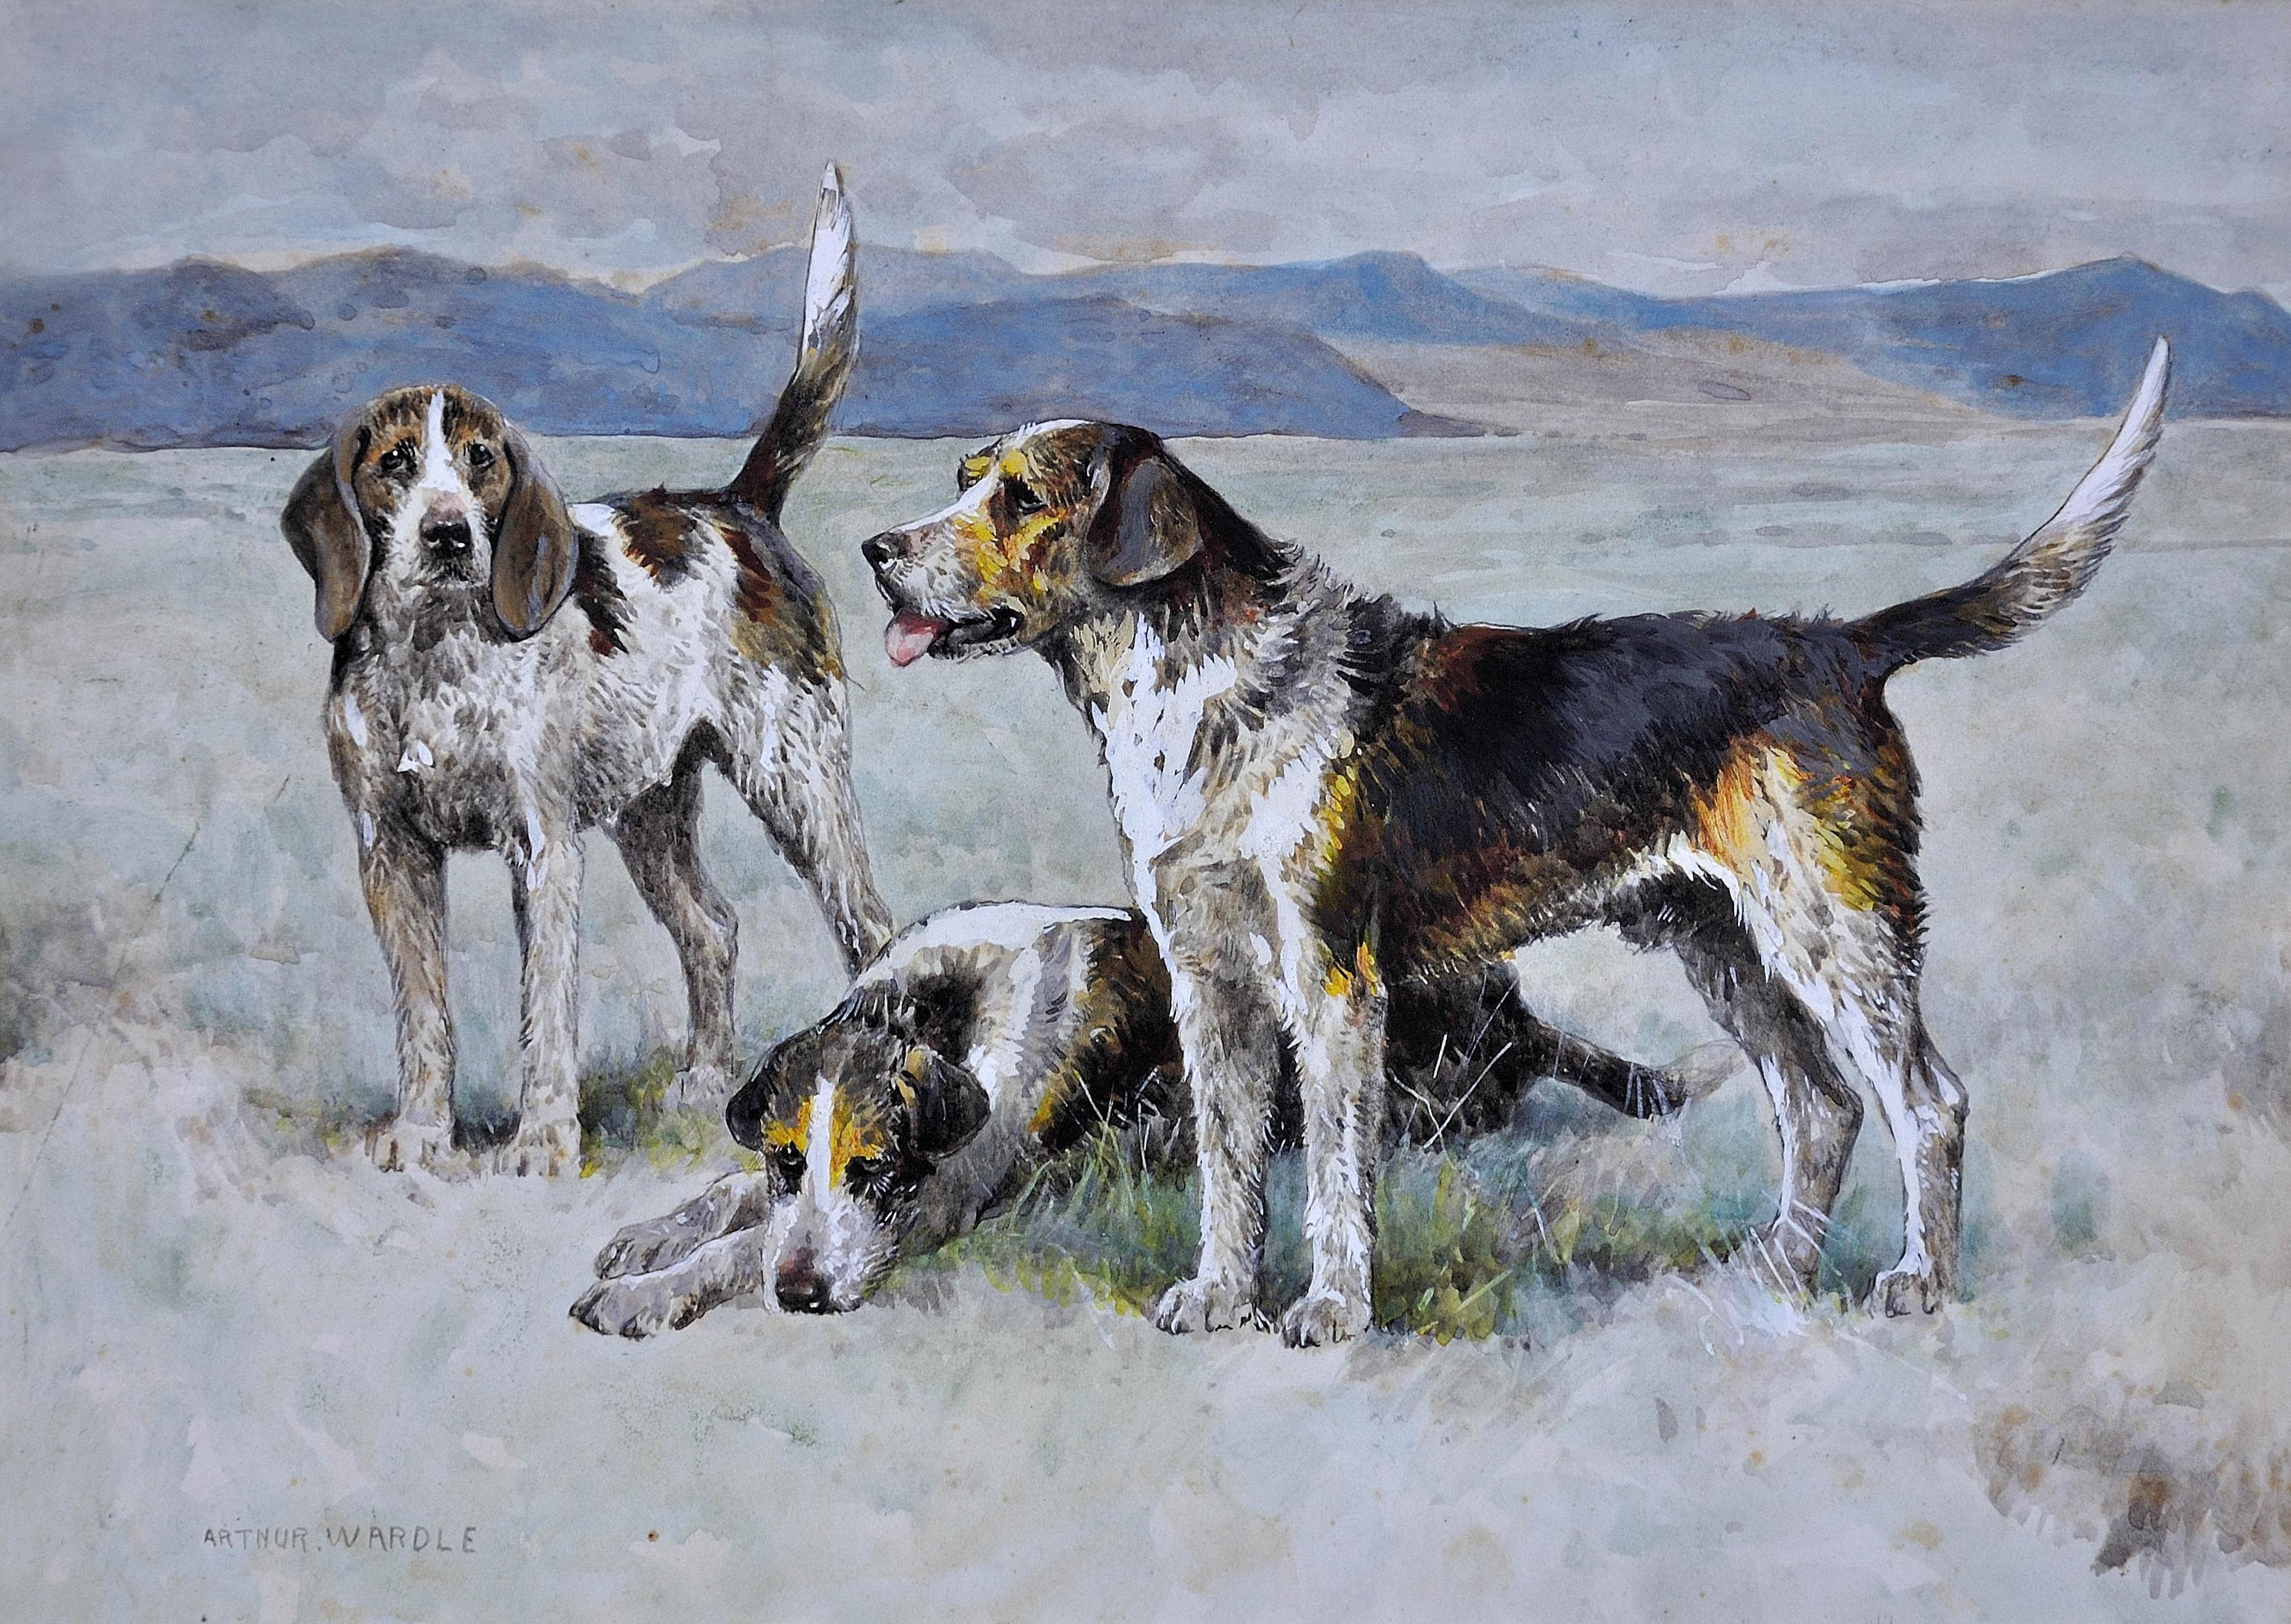 Welsh Hounds from the Packs of Lieutenant Buckley & the Honourable H.C. Wynn. - Art by Arthur Wardle